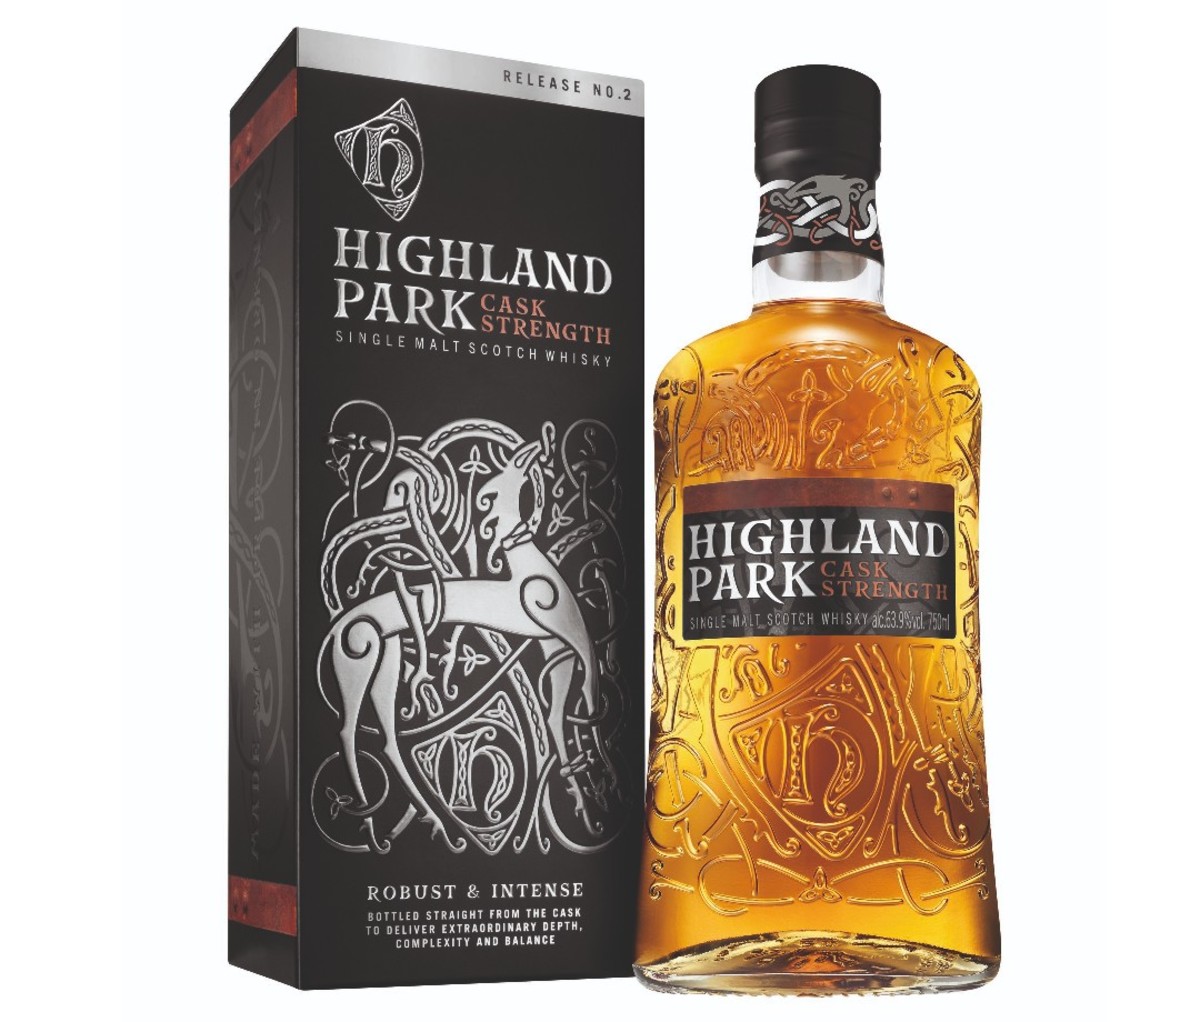 Bottle and container of Highland Park Cask Strength Single Malt Scotch Whisky